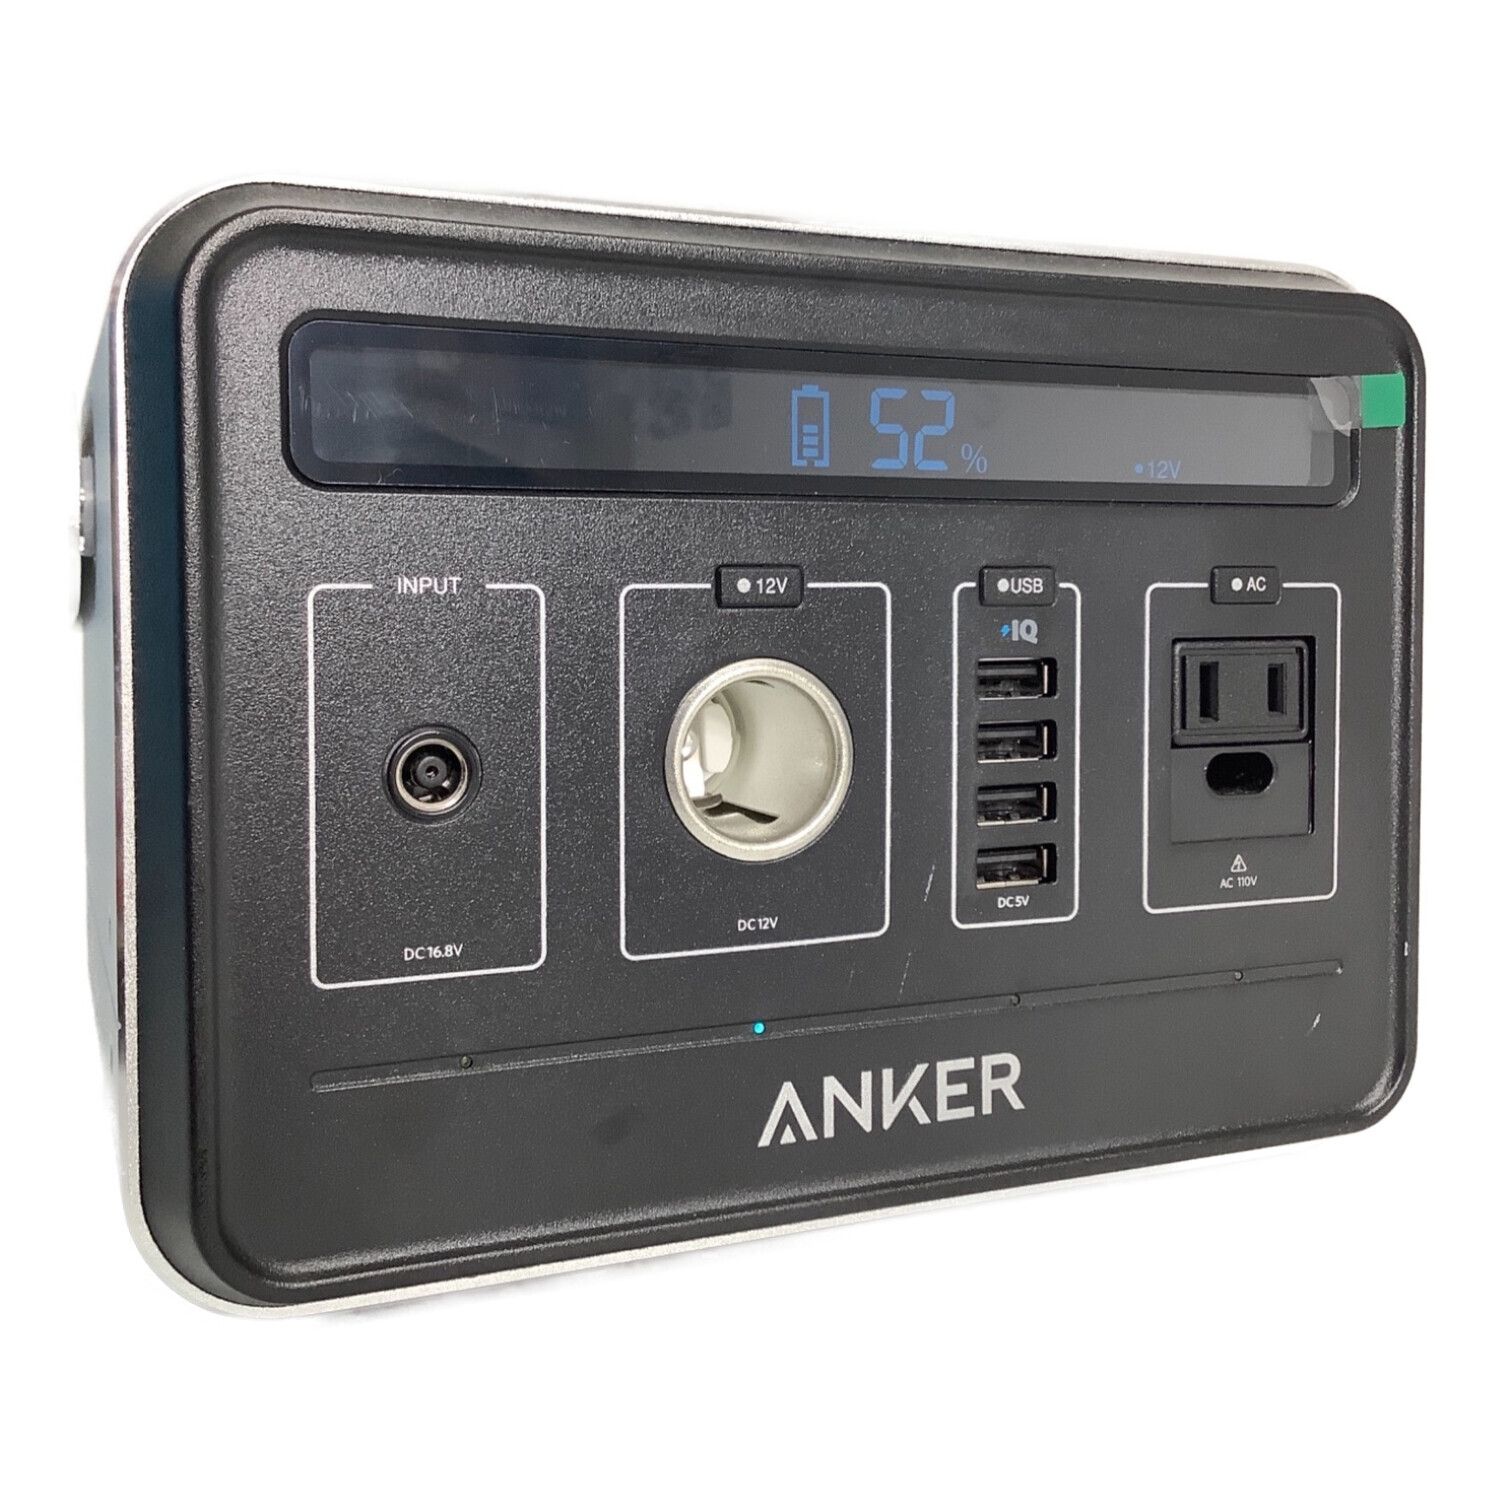 Anker (アンカー) ポータブル電源 Power House 通電確認済 A1701511